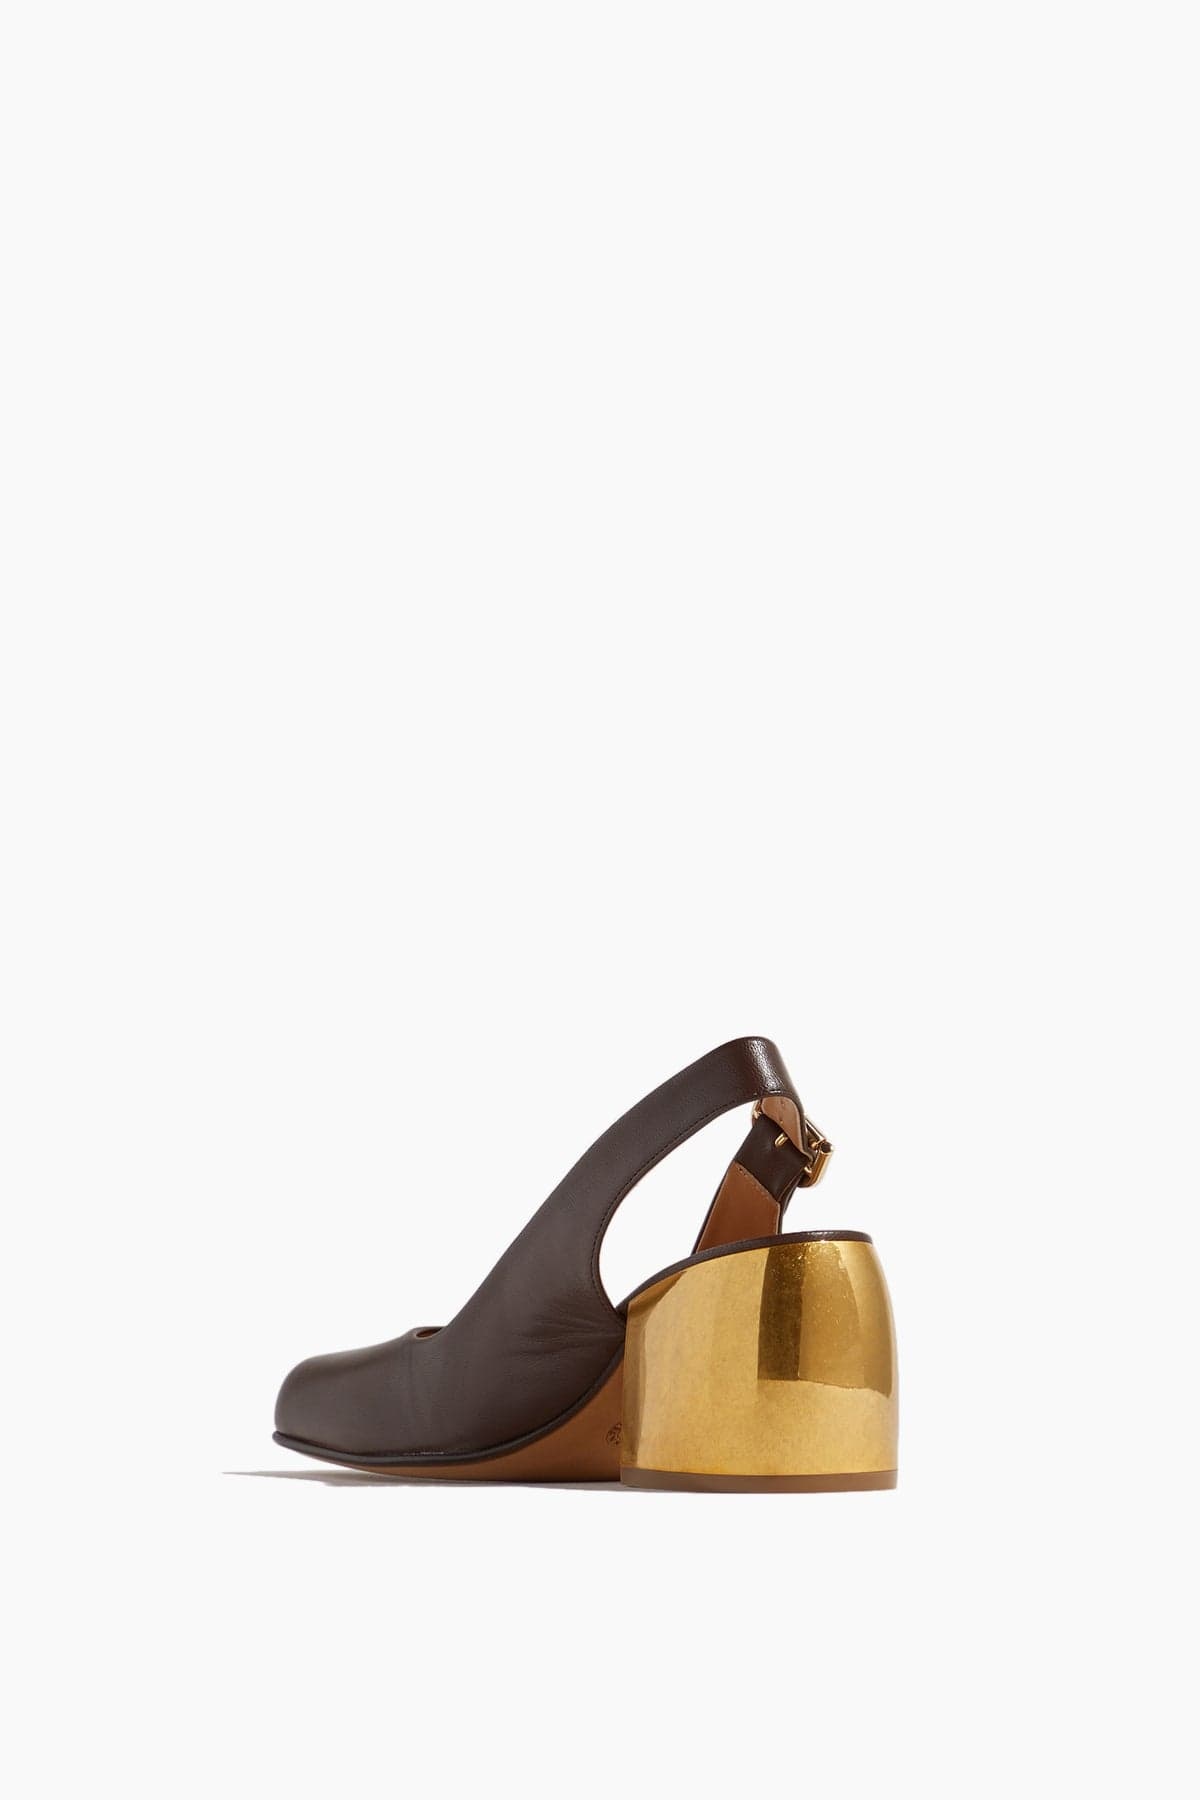 Sling Back Pump with Gold Heel in Brown - 3